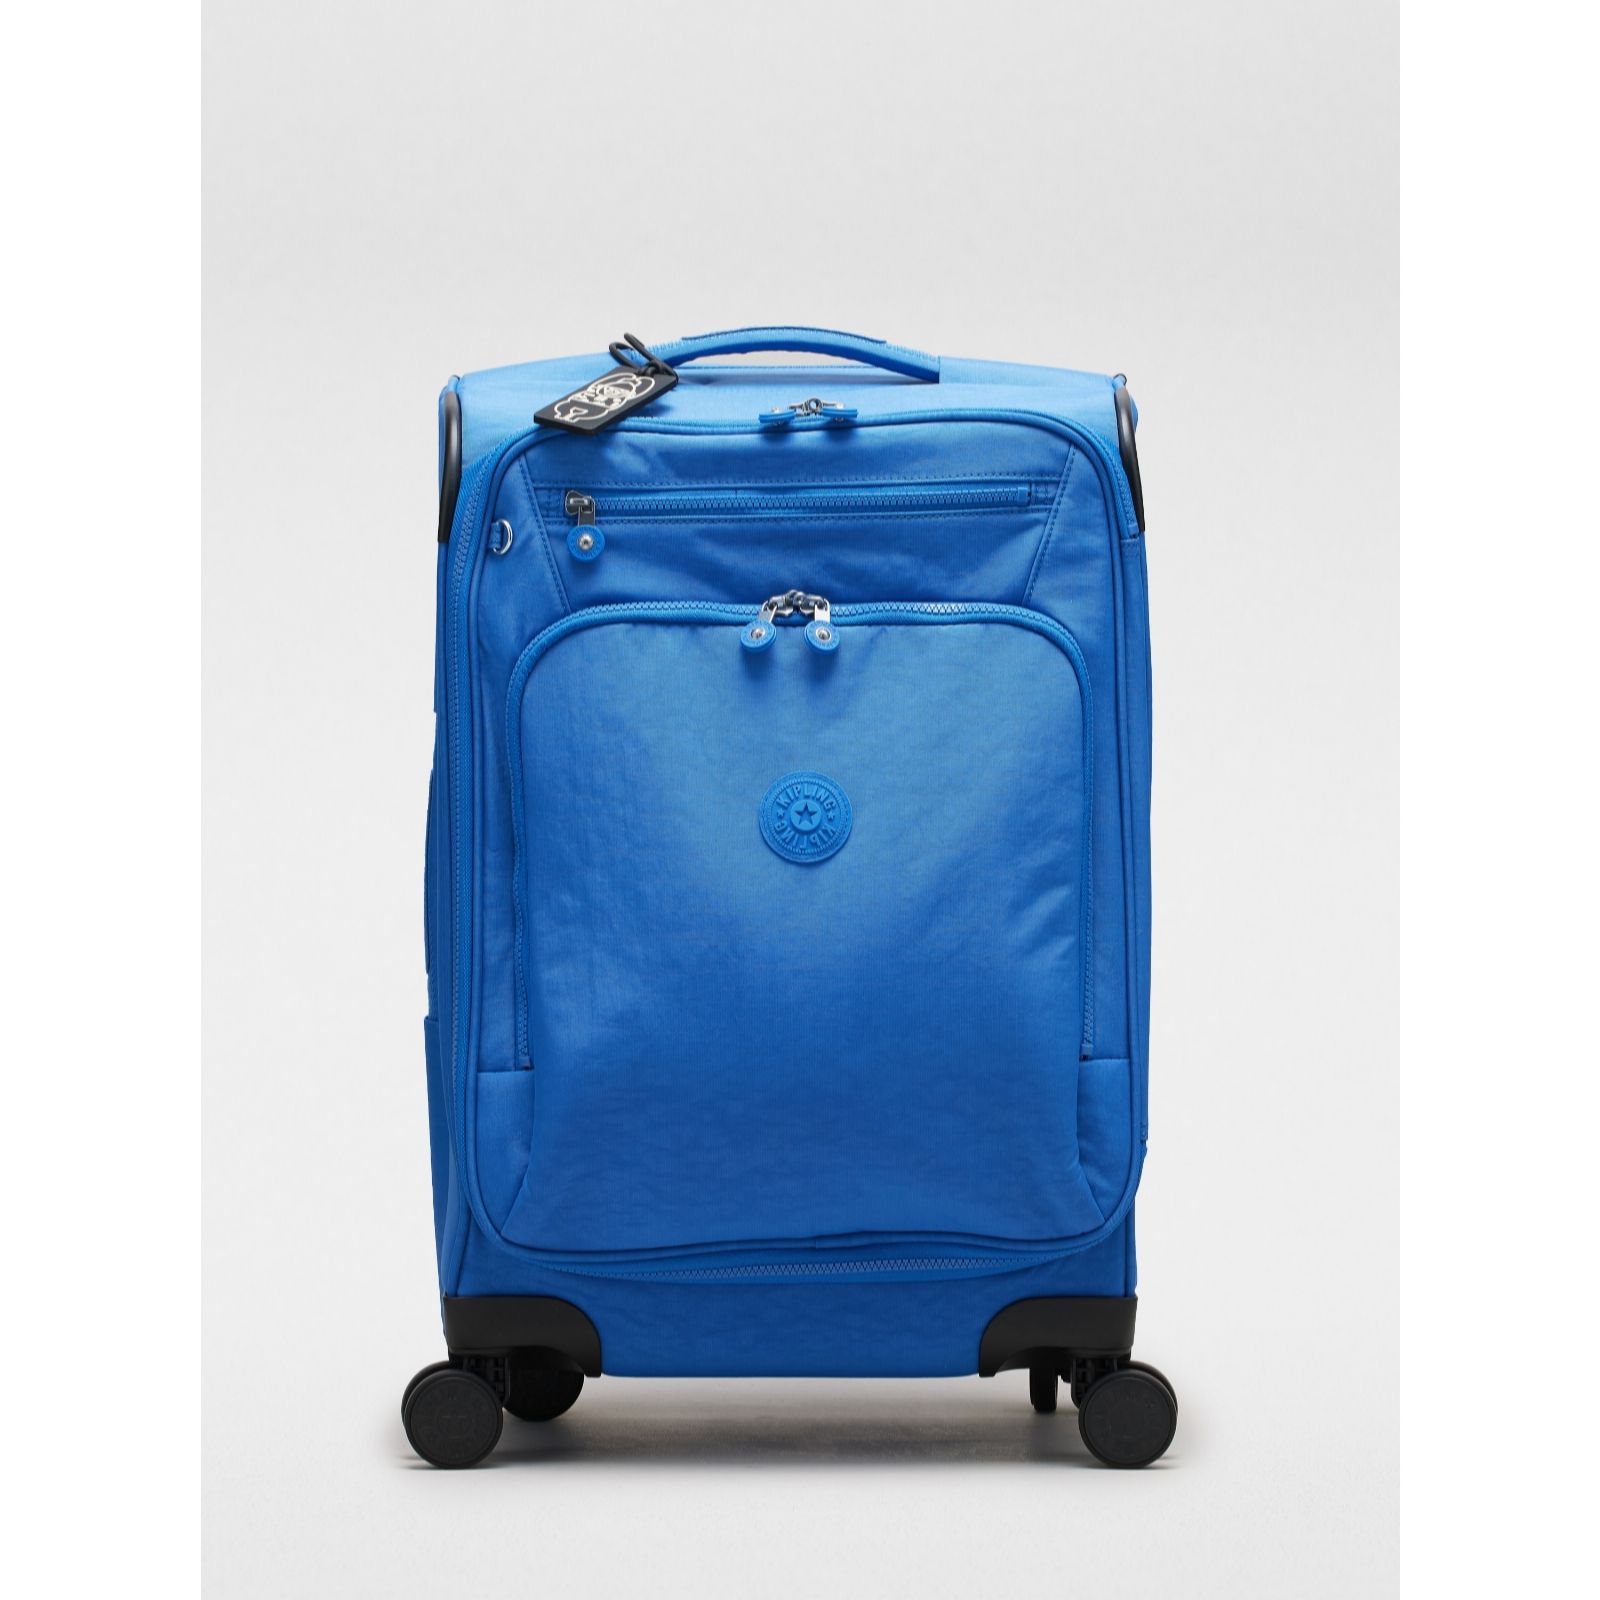 Kipling New Youri Spin S Suitcase